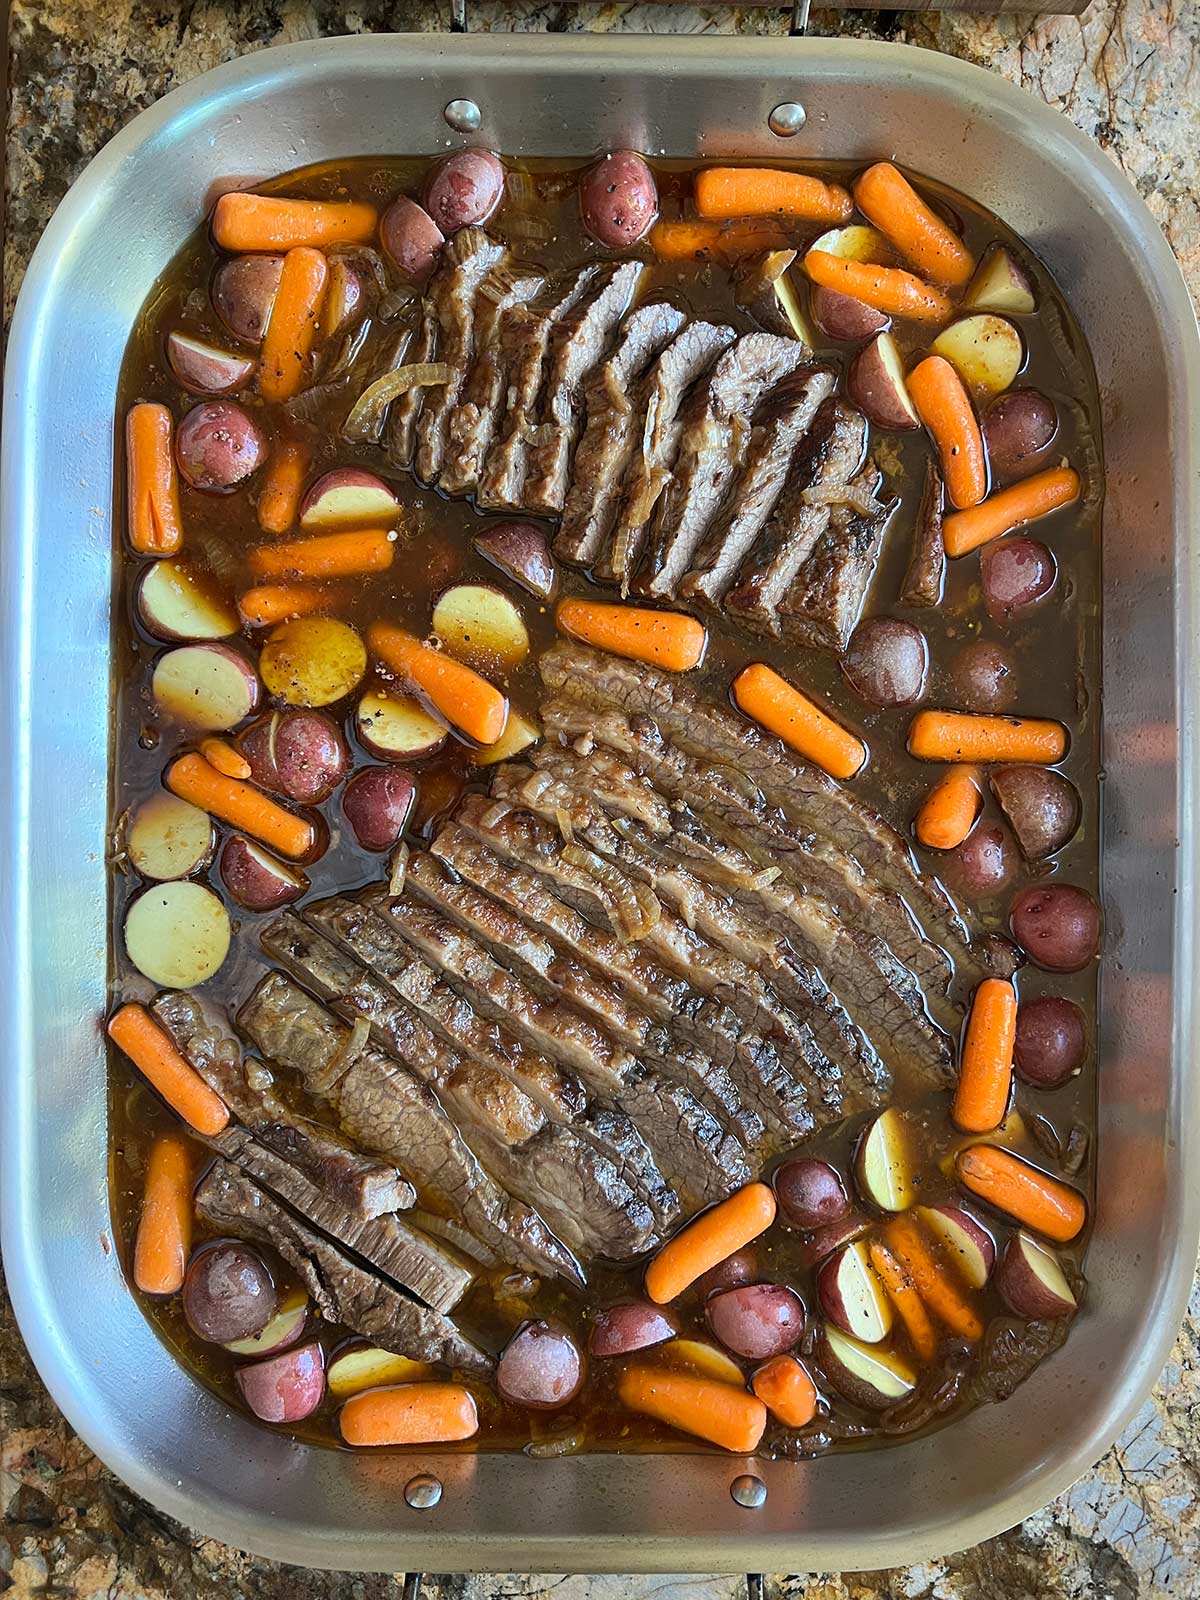 Sliced brisket placed back in pan with potatoes and carrots added in.